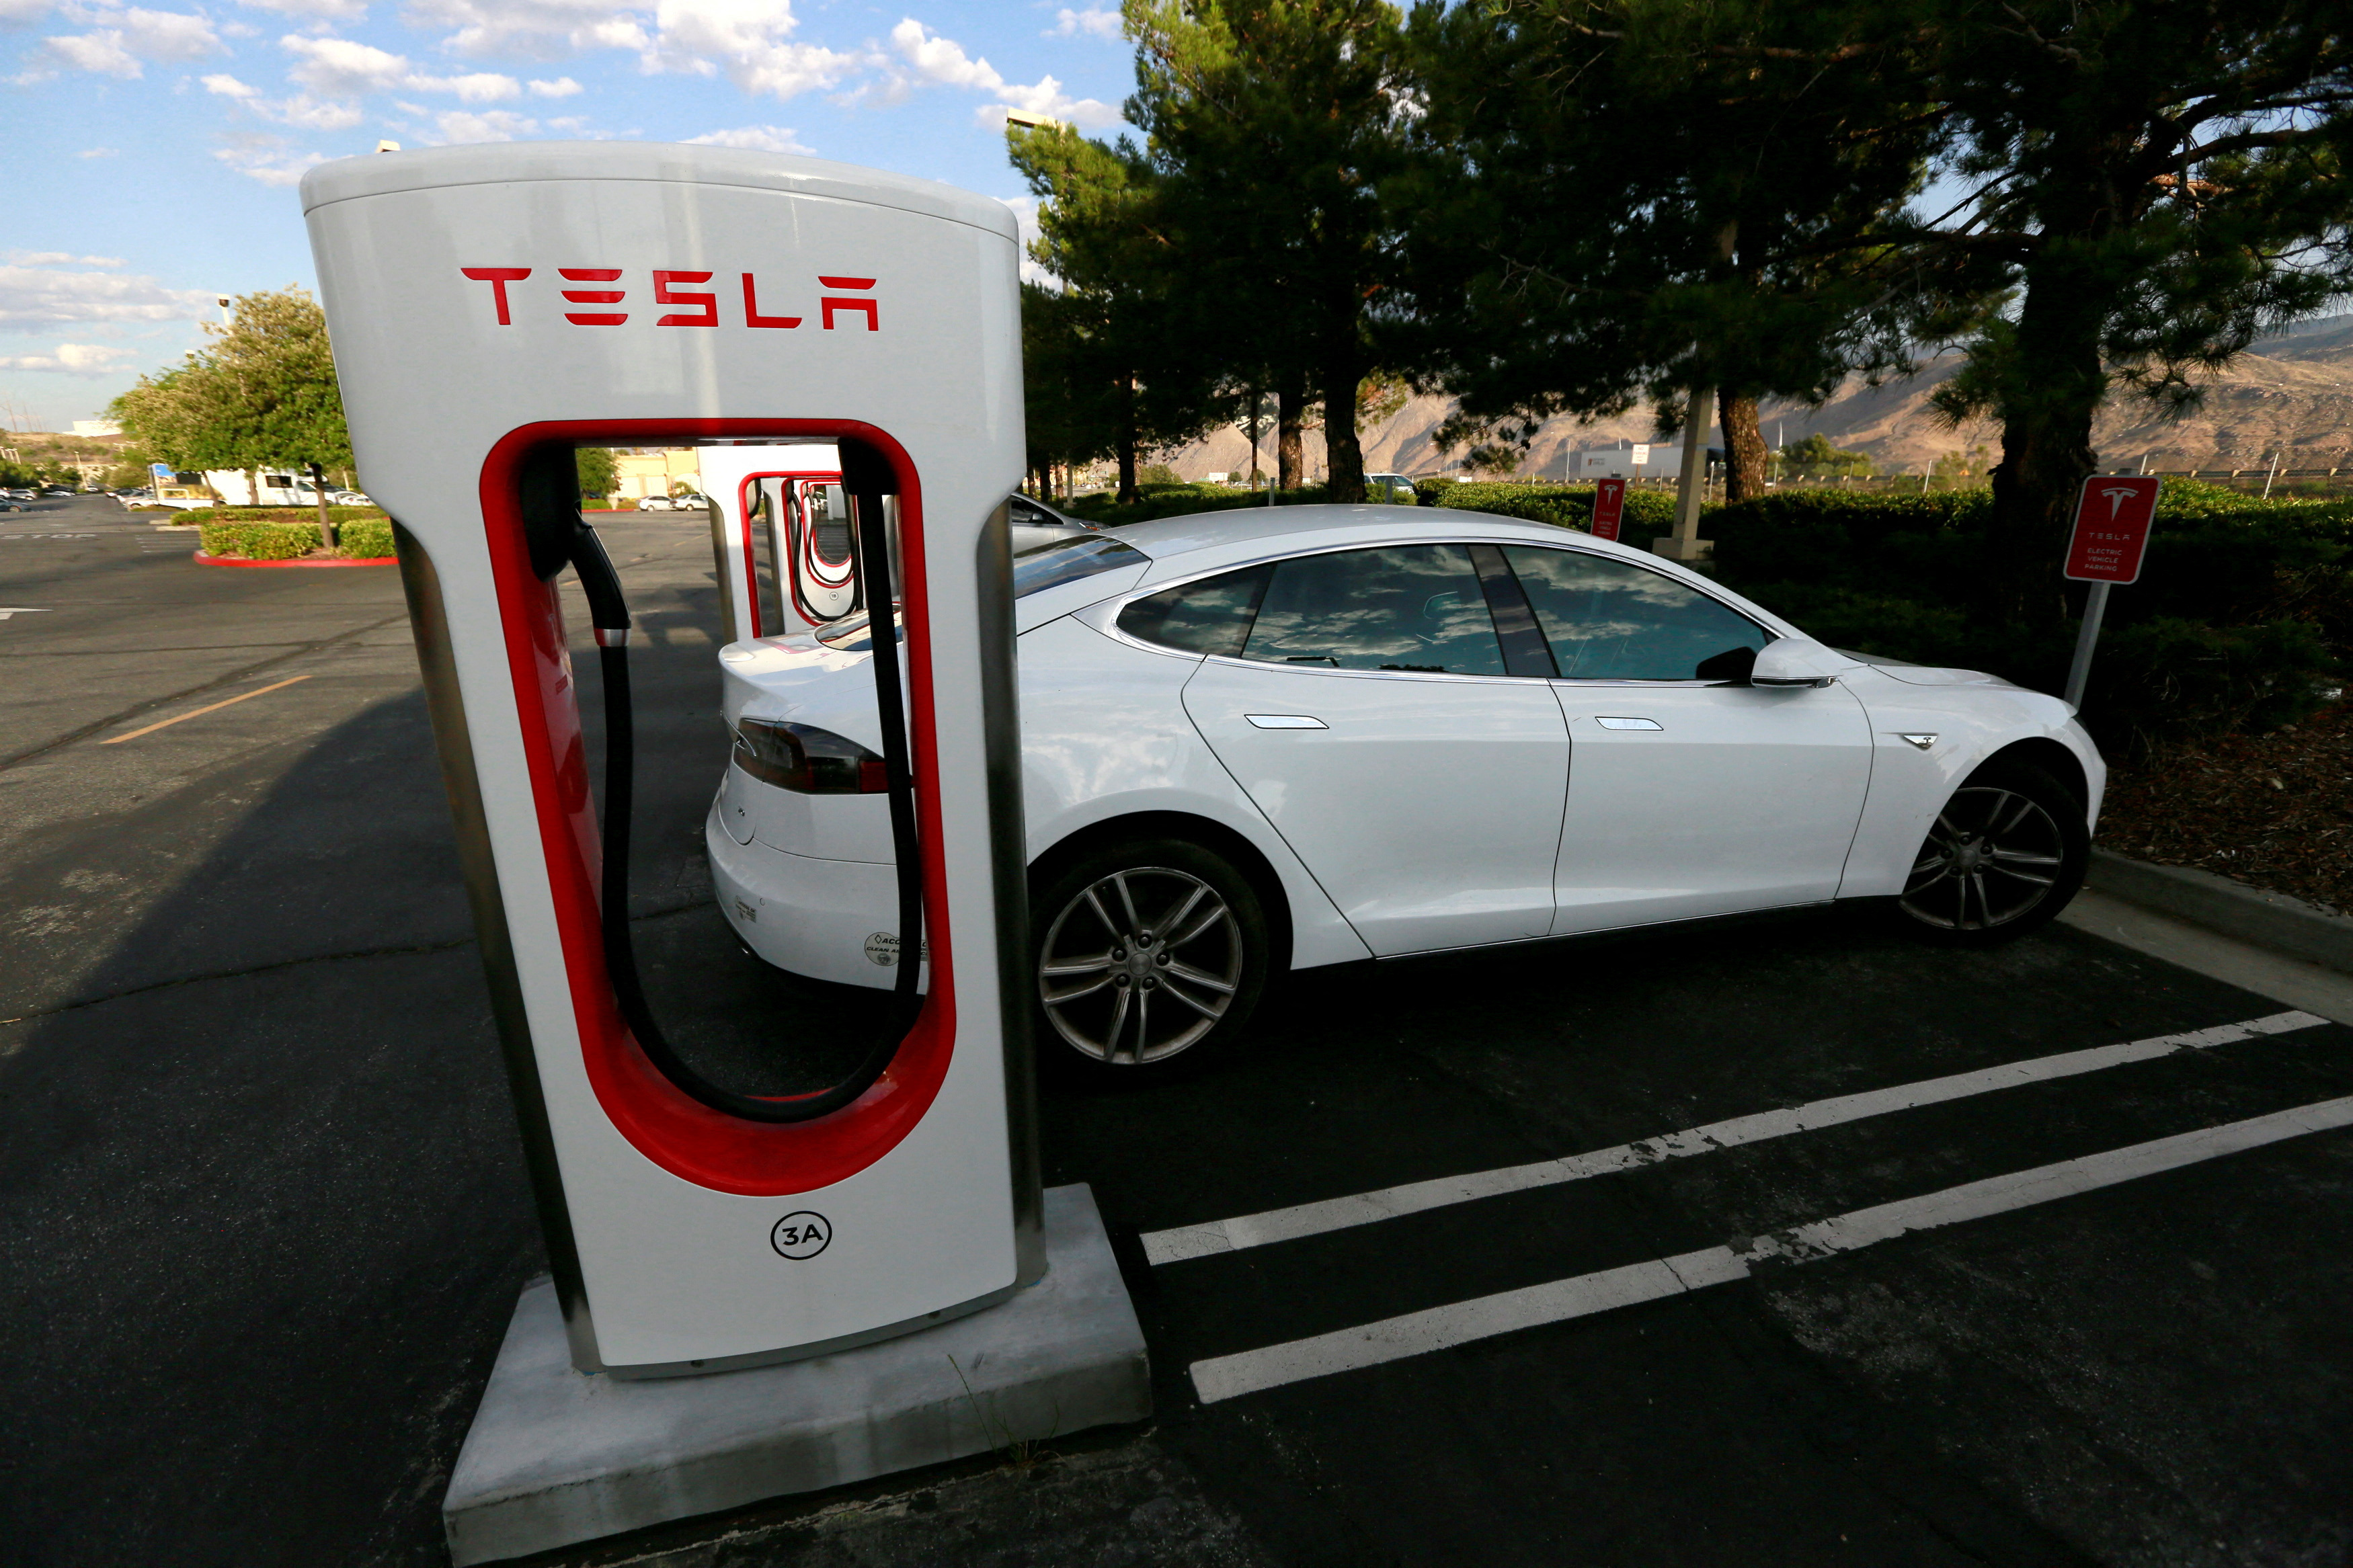 A Tesla Model S charges at a Tesla supercharger station in Cabazon, California